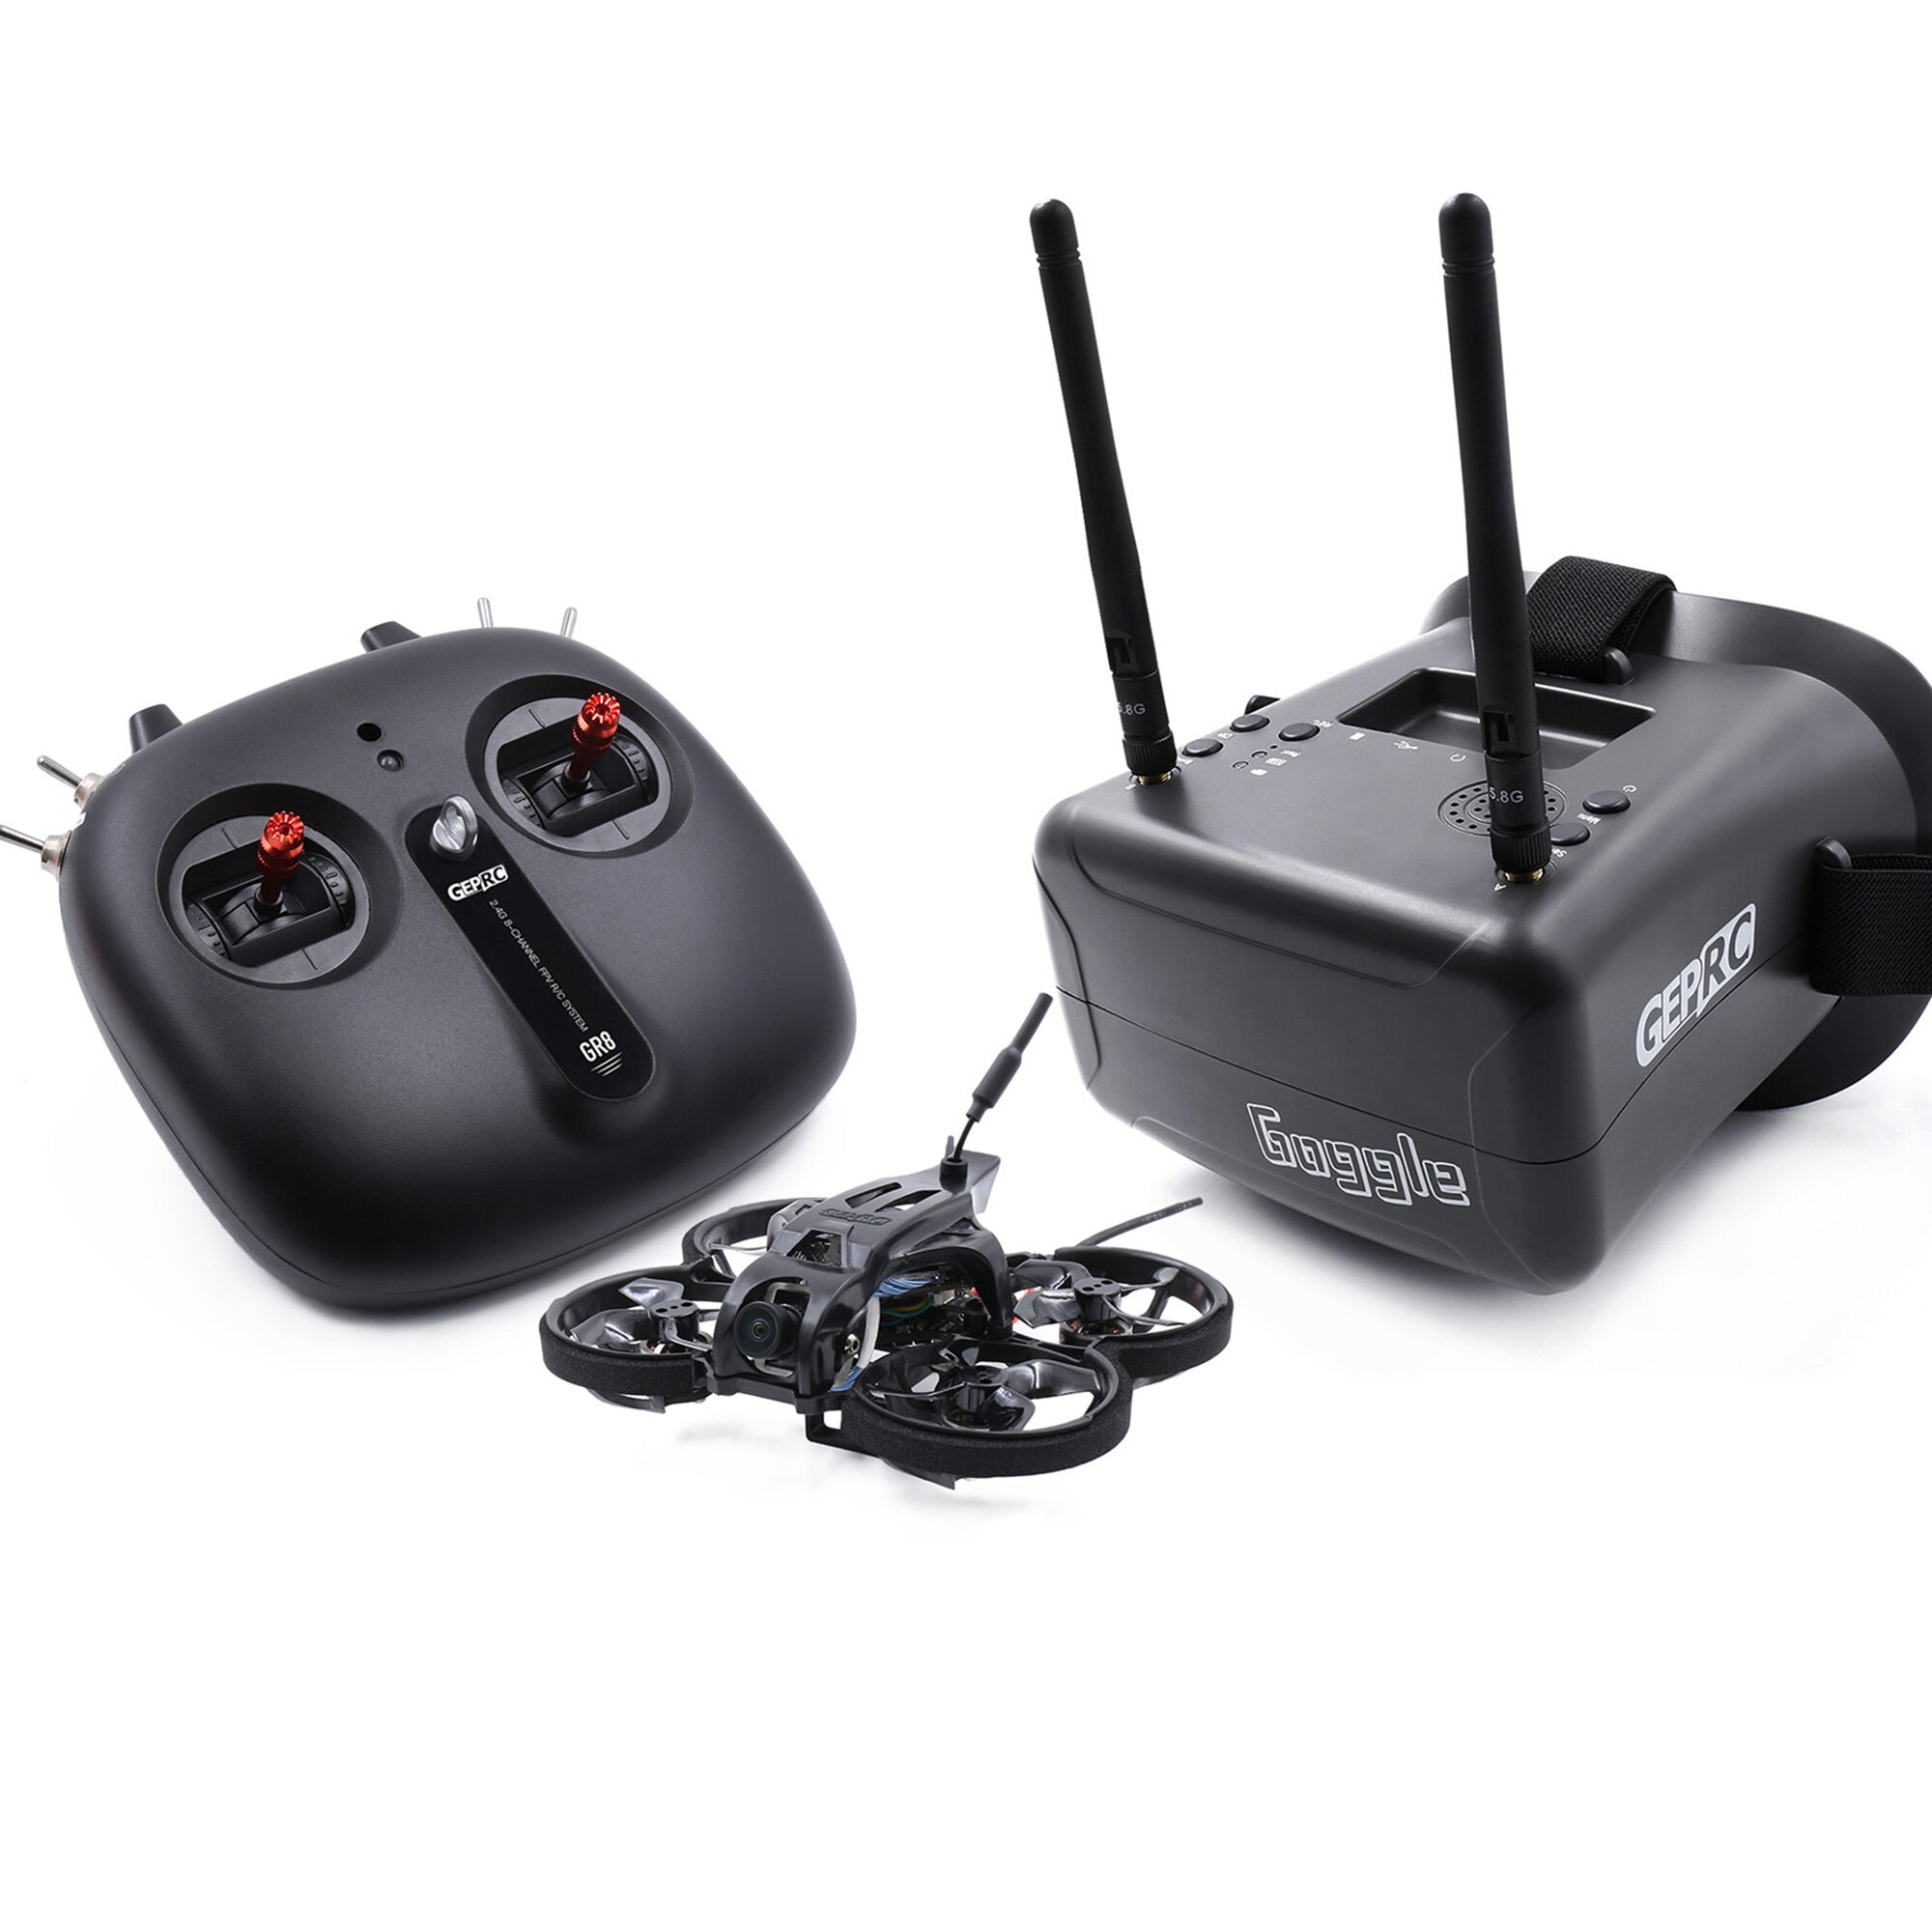 $251.99 for GEPRC TinyGO 1.6inch 2S 4K Caddx Loris FPV Indoor Whoop＋GR8 Remote Controller＋RG1 Goggles RTF Ready To Fly FPV Racing RC Drone